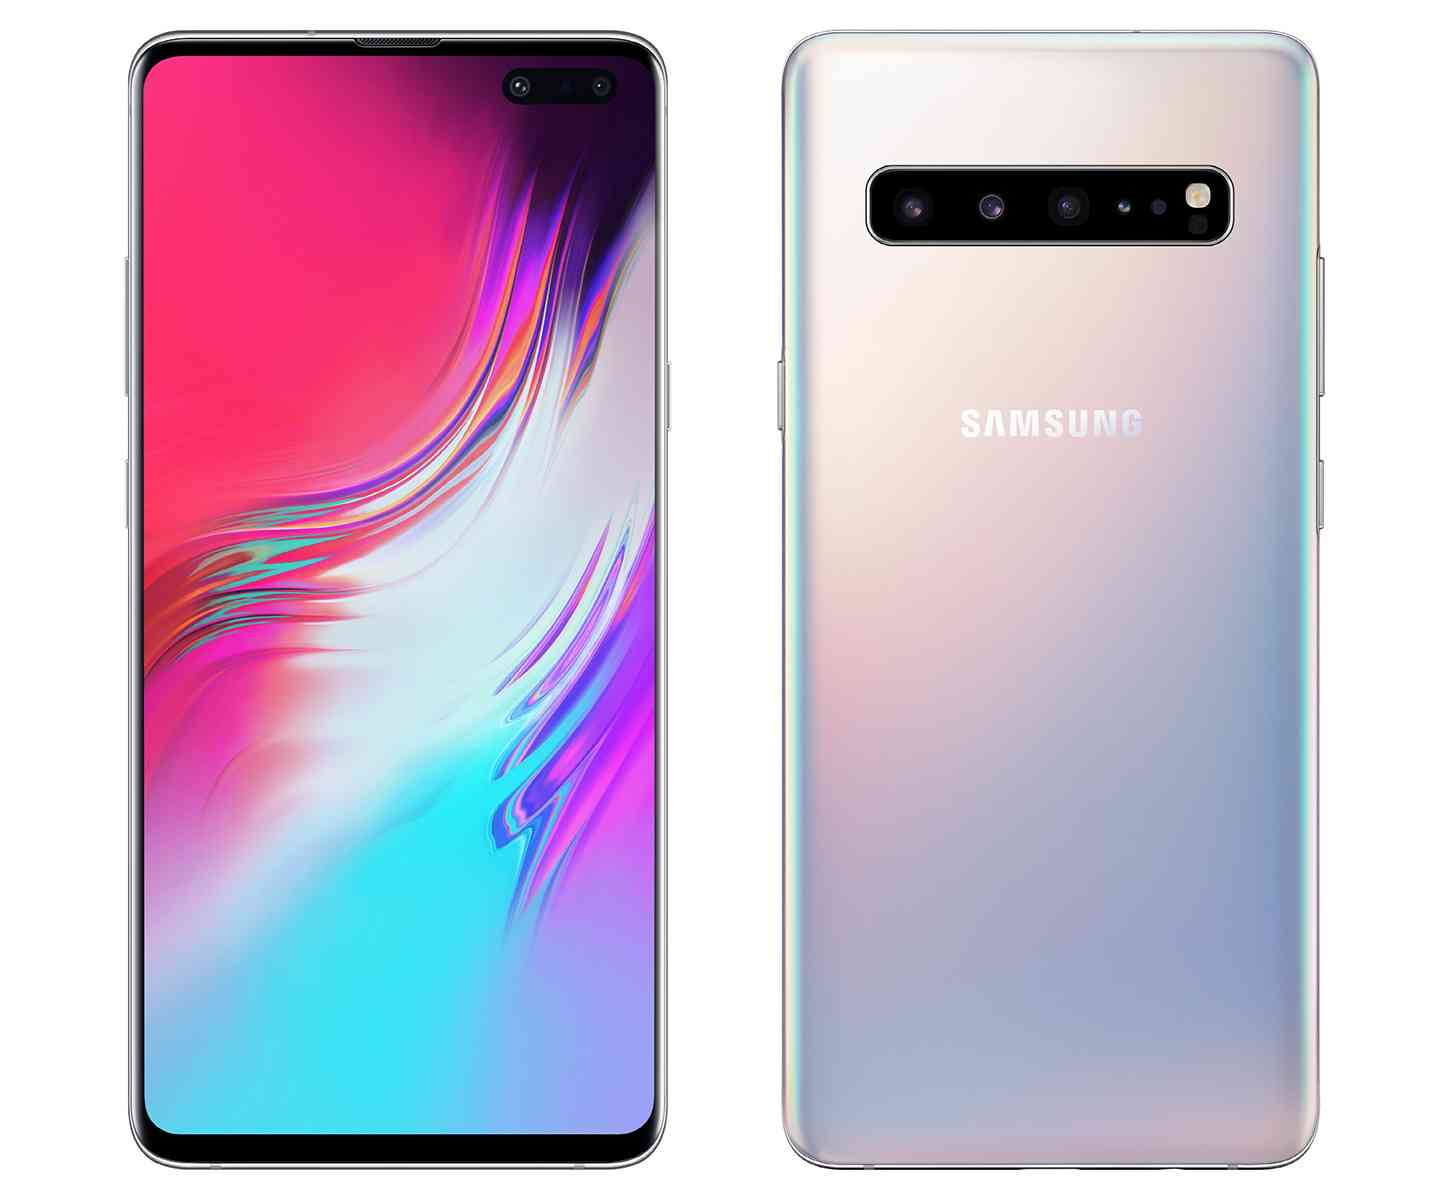 T Mobile Launching Galaxy S10 5g And Its 5g Network On June 28th News Wirefly